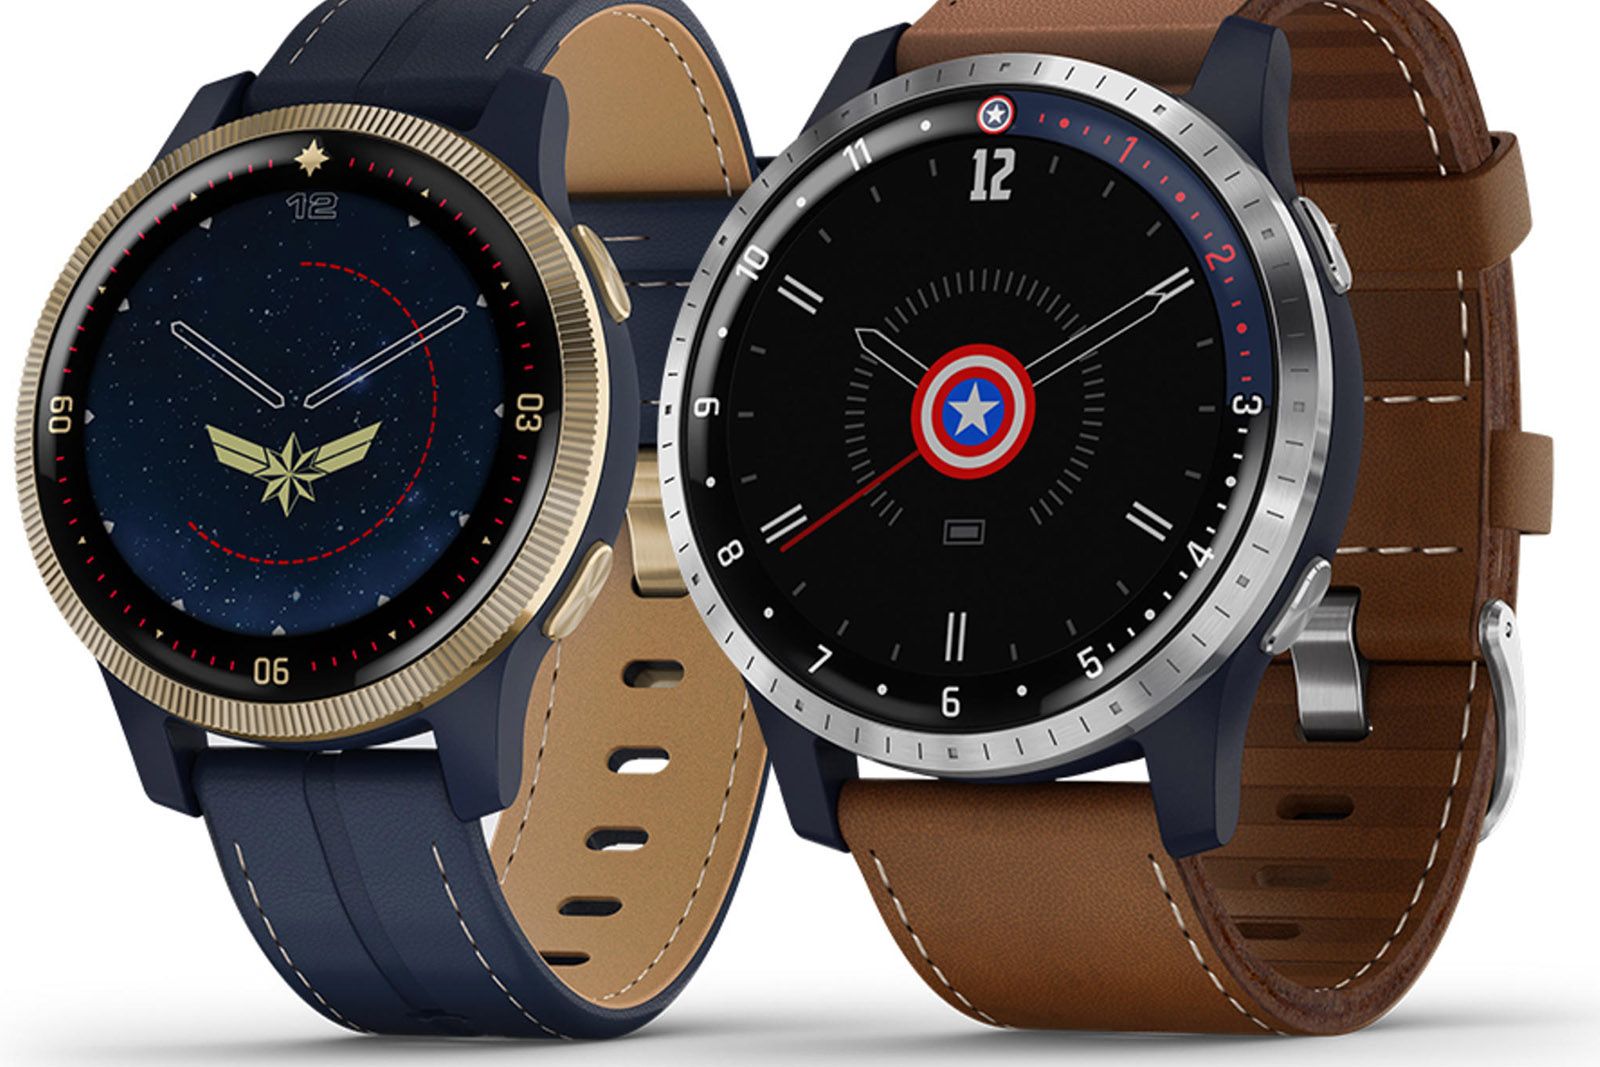 Garmin Legacy Hero smartwatches come in Captain America and Captain Marvel flavours image 1